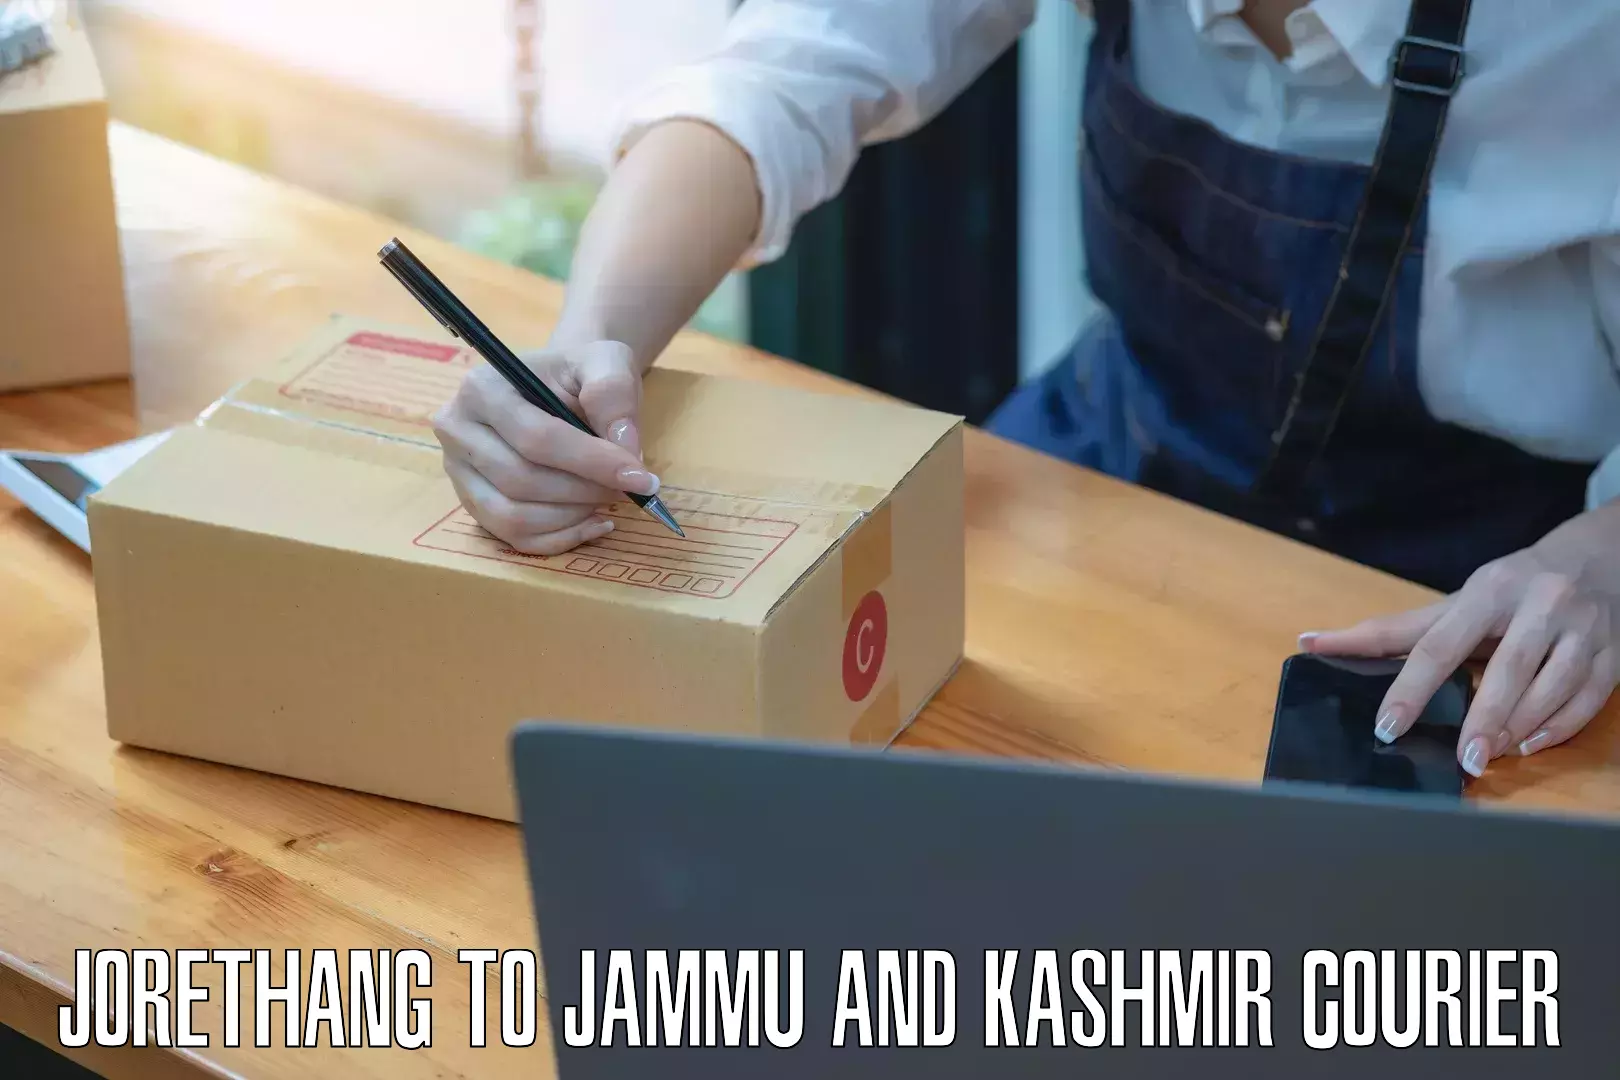 Pharmaceutical courier Jorethang to Baramulla